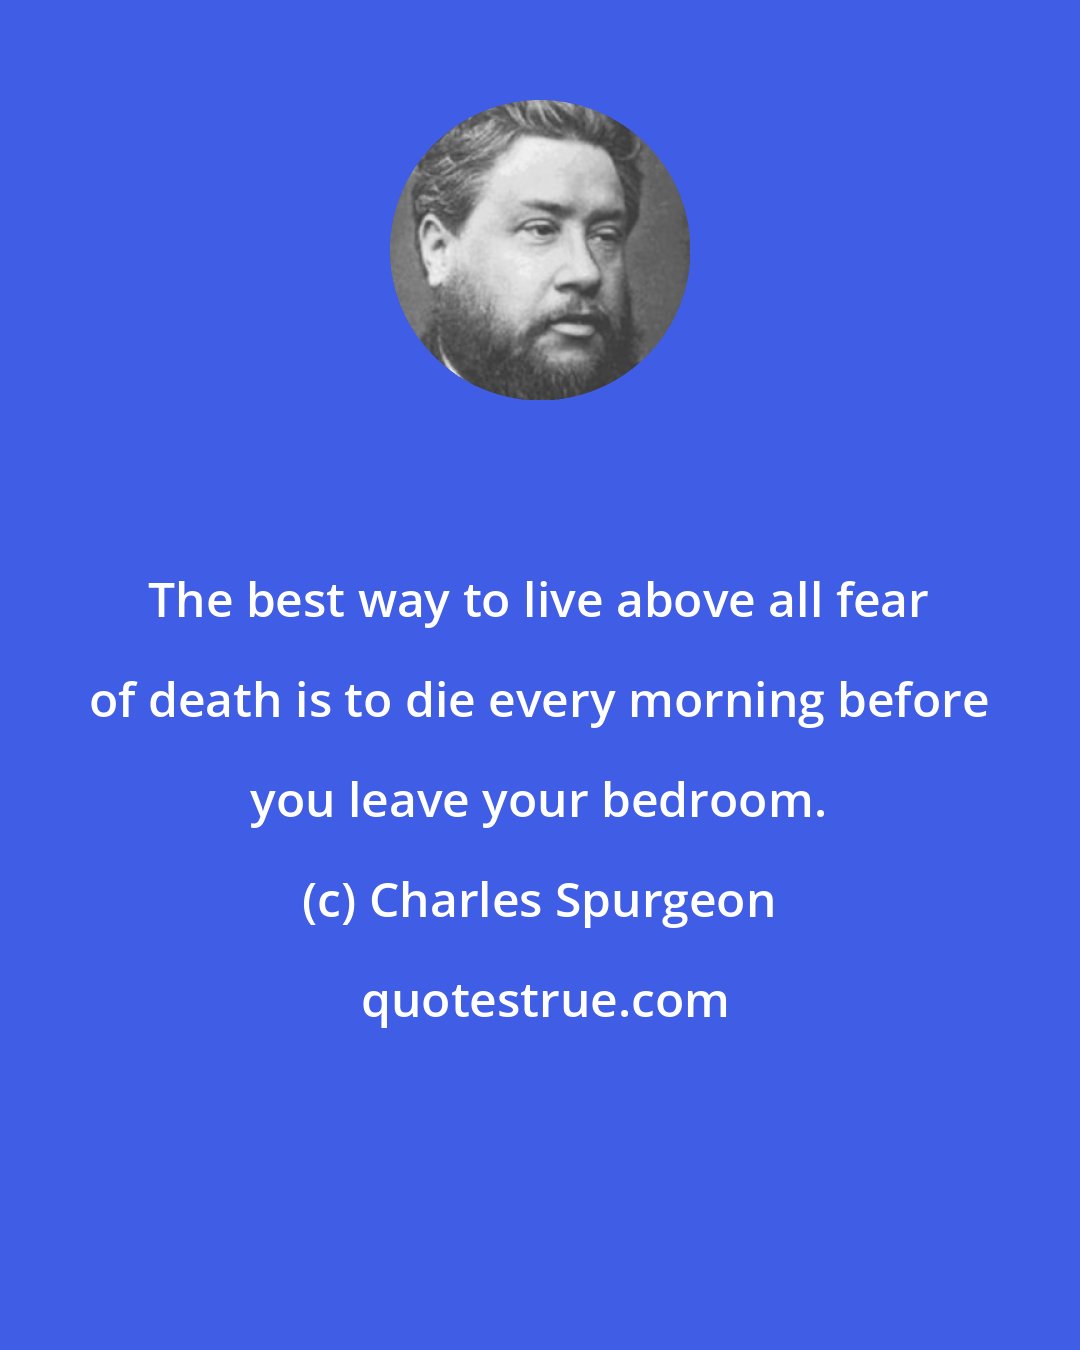 Charles Spurgeon: The best way to live above all fear of death is to die every morning before you leave your bedroom.